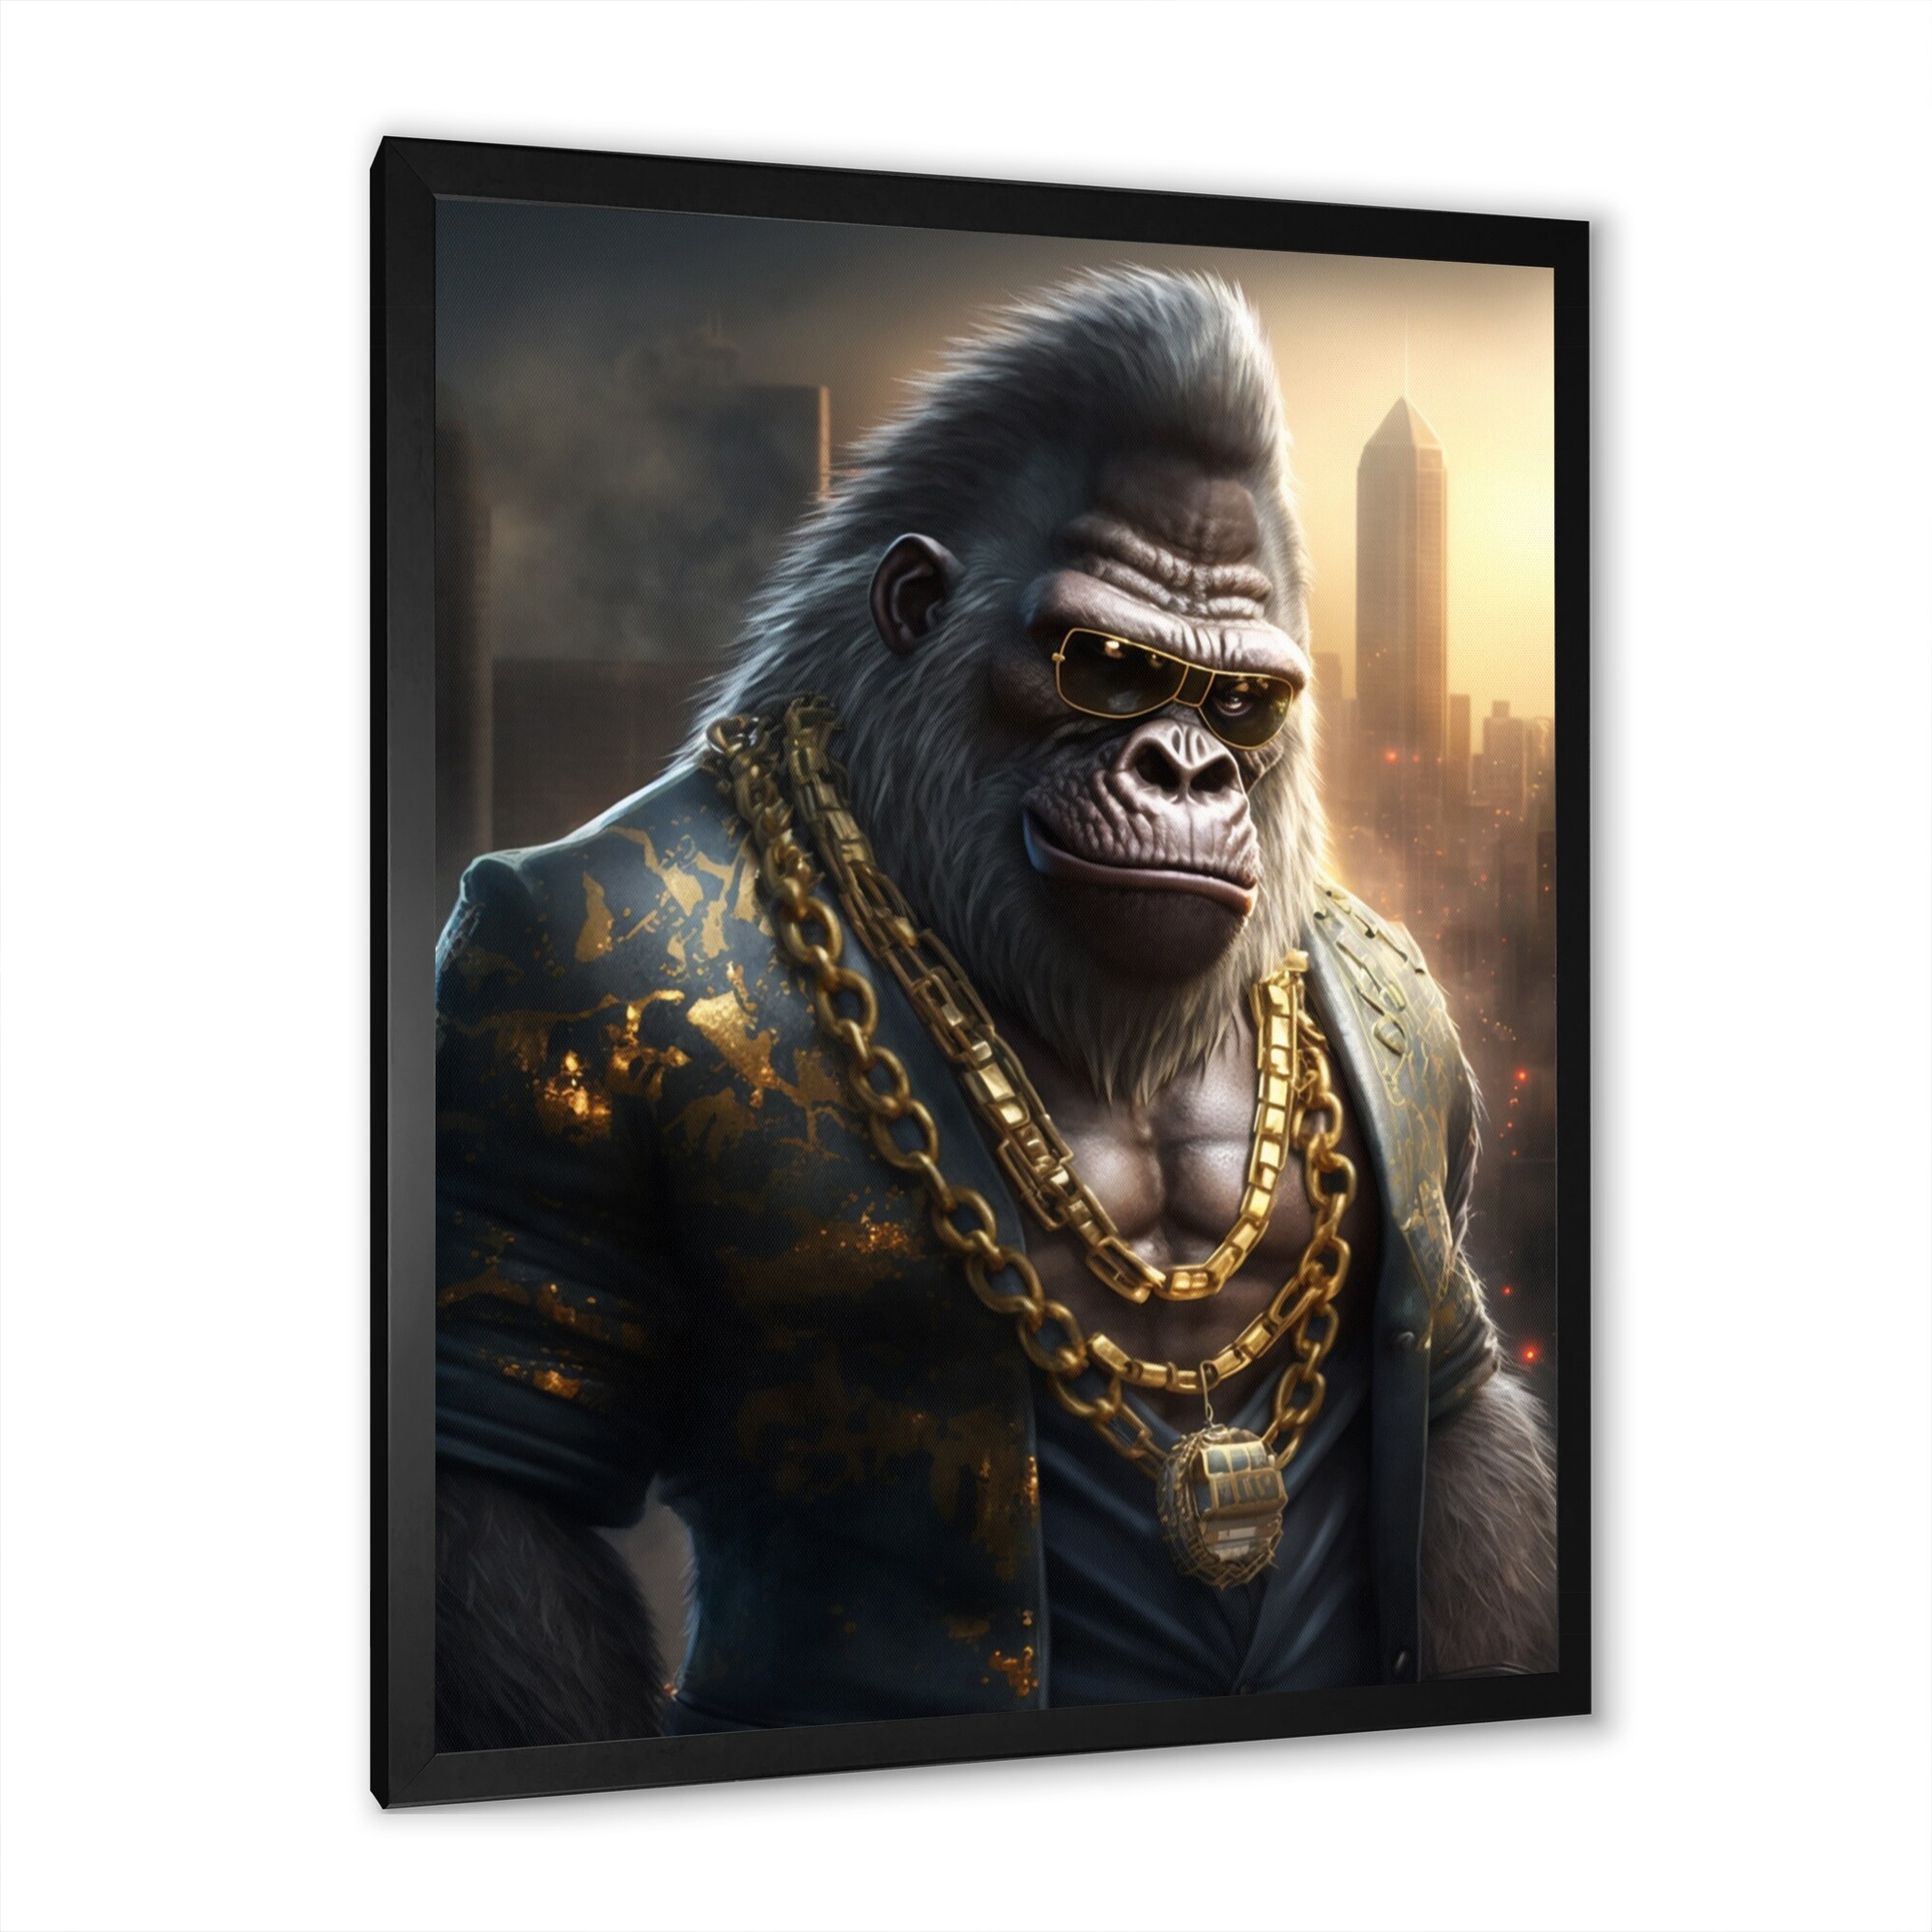 https://ak1.ostkcdn.com/images/products/is/images/direct/0c910527260120a6391e9bee54082b77f4d08aed/Designart-%22Gangster-Gorilla-I%22-Animals-Framed-Art-Print.jpg